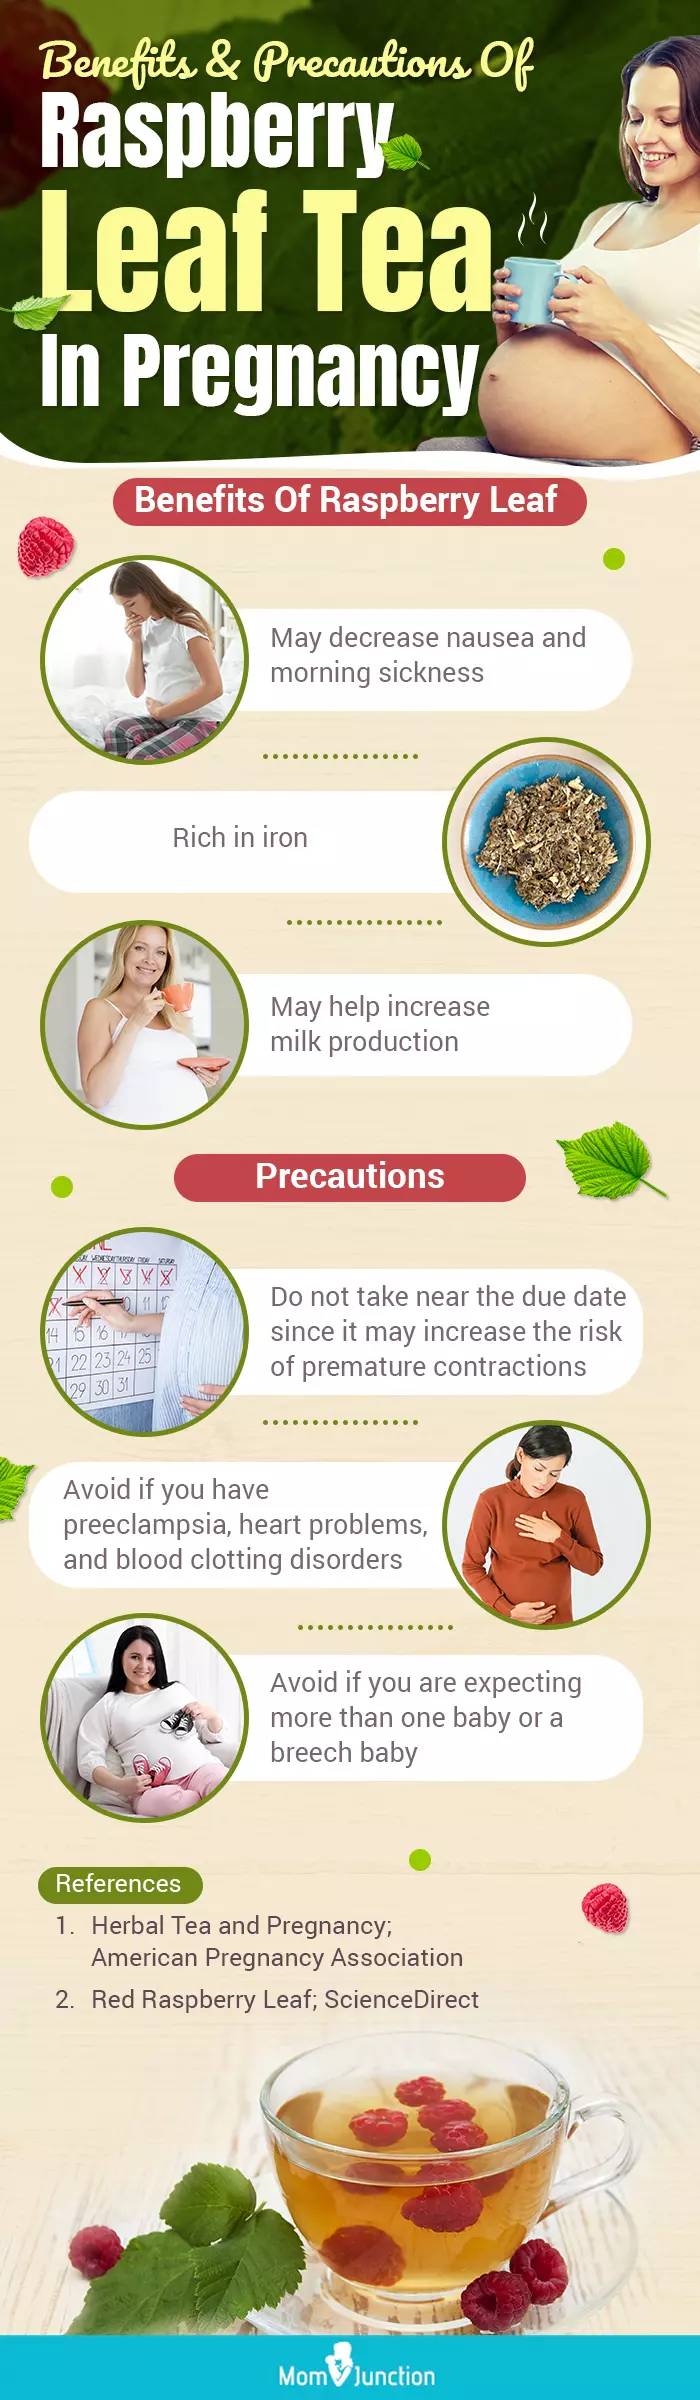 benefits and precautions of raspberry leaf tea in pregnancy (infographic)